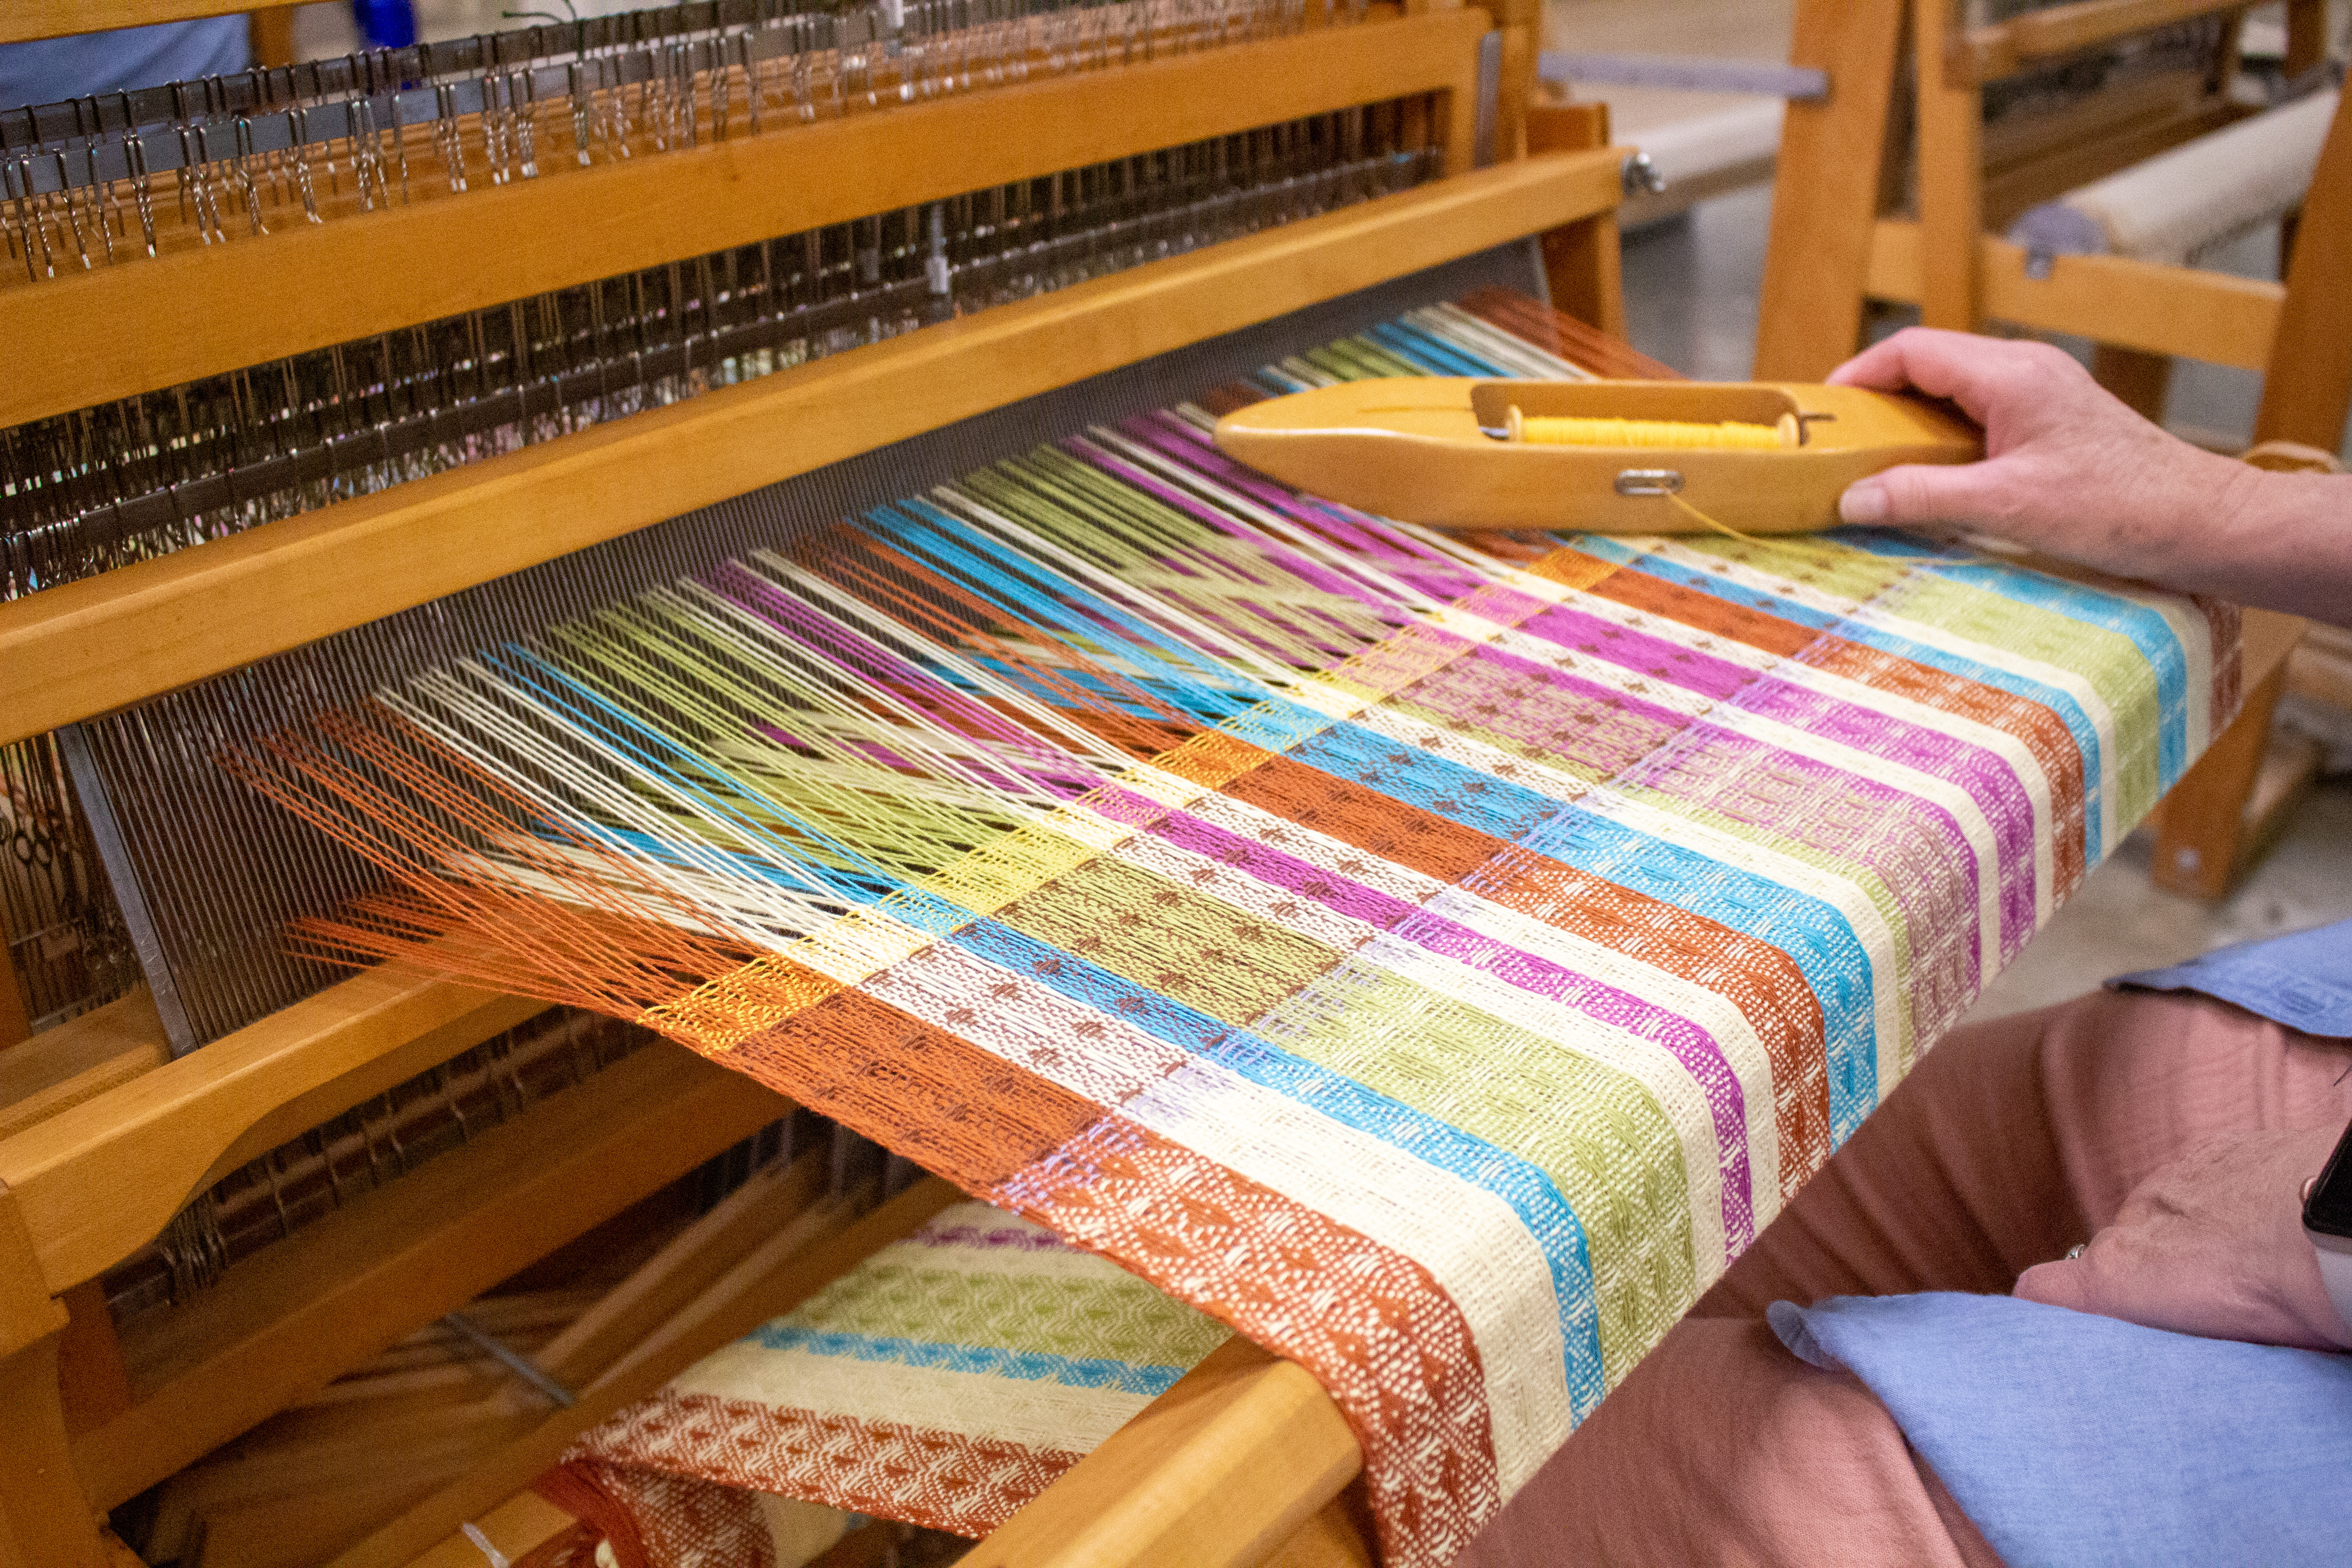 A zoomed in image of a colorful woven work in process on a loom. A hand holds a shuttle with yellow thread in the background, ready to continue weaving.